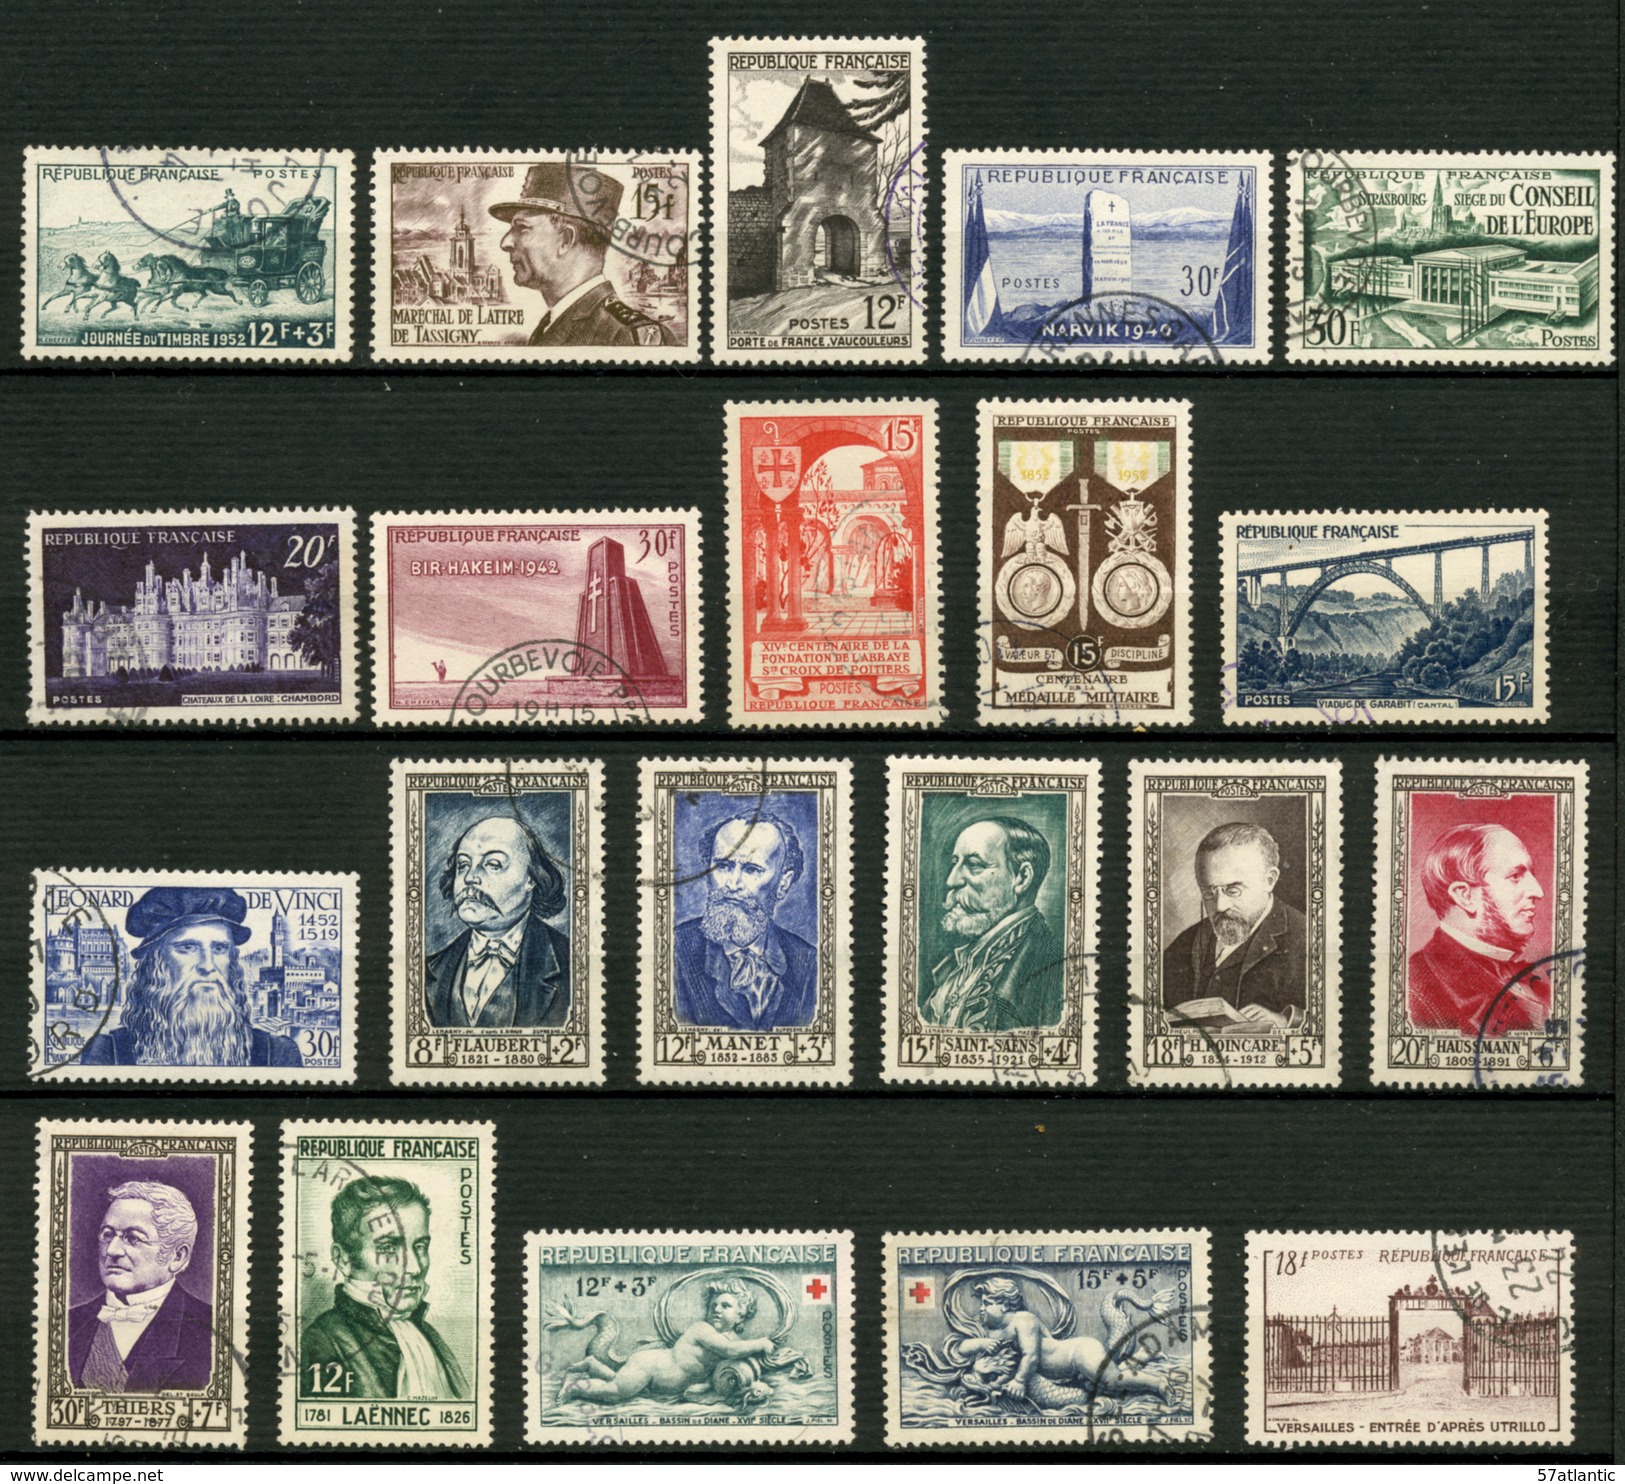 FRANCE - ANNEE COMPLETE 1952 - YT 919 à 939 - 21 TIMBRES OBLITERES - 1950-1959